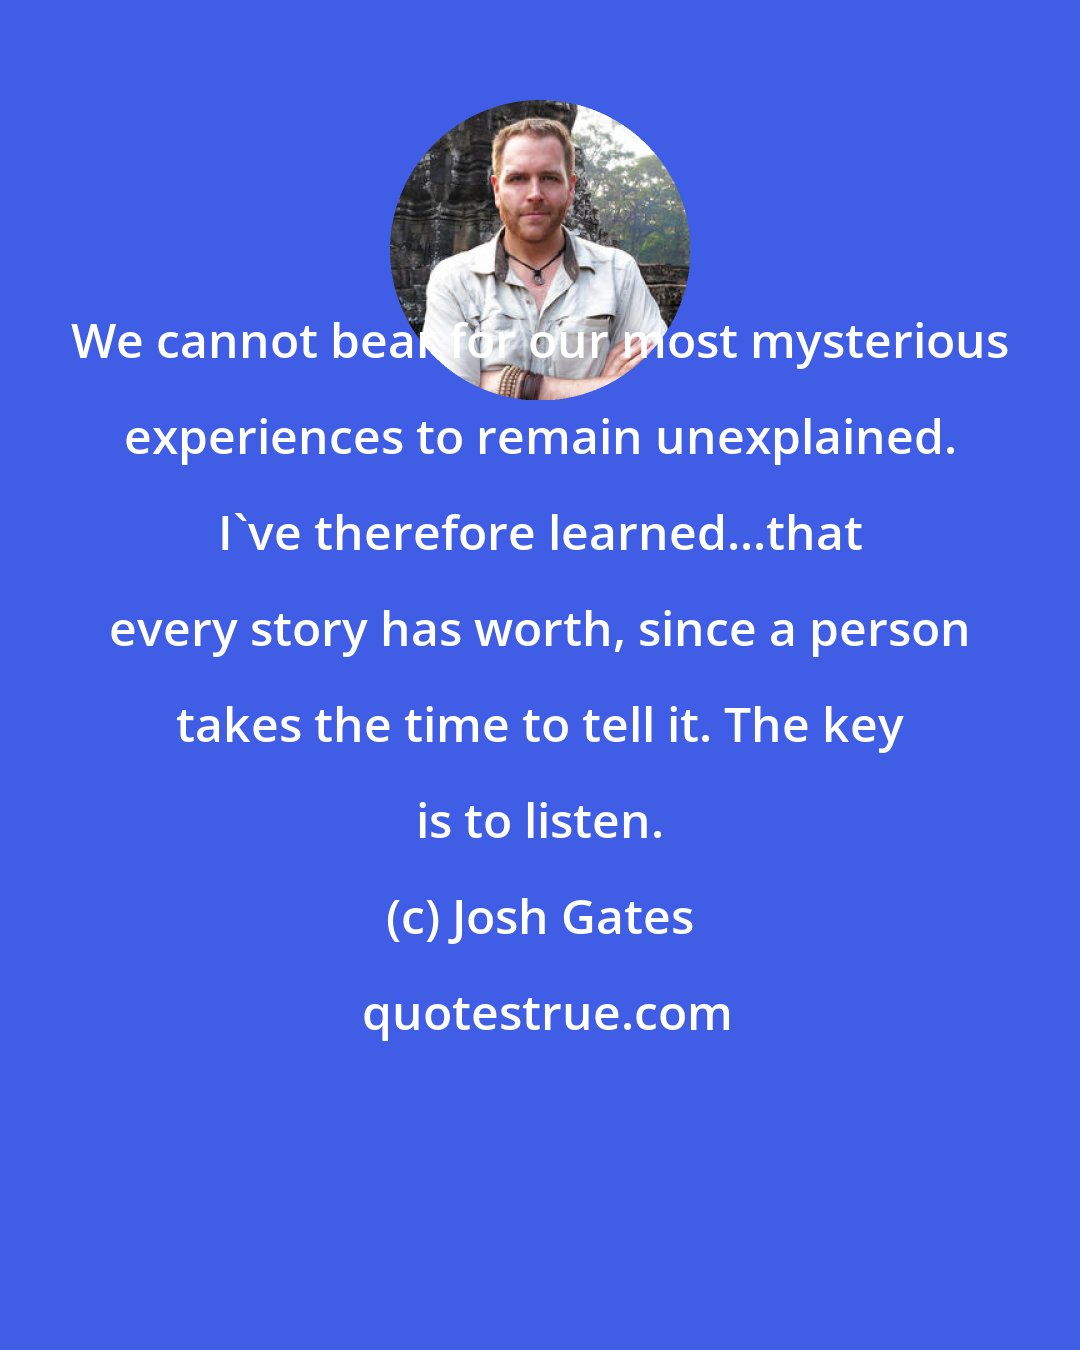 Josh Gates: We cannot bear for our most mysterious experiences to remain unexplained. I've therefore learned...that every story has worth, since a person takes the time to tell it. The key is to listen.